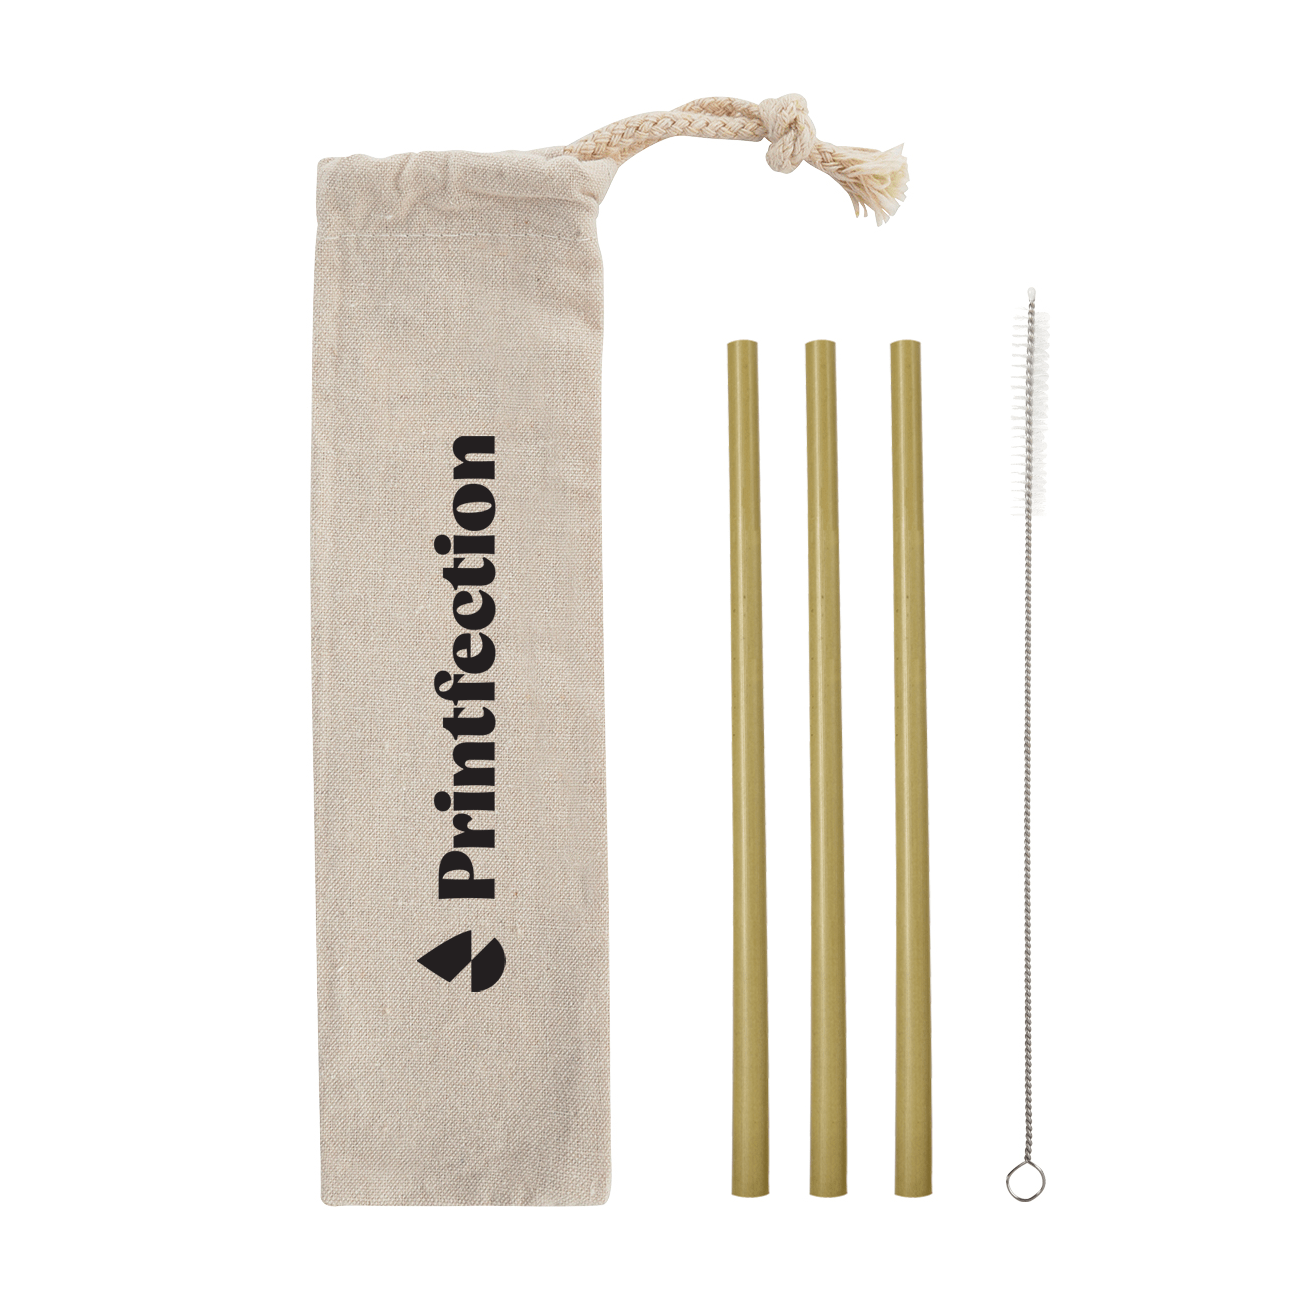 eco-friendly straws make for a great branded gift